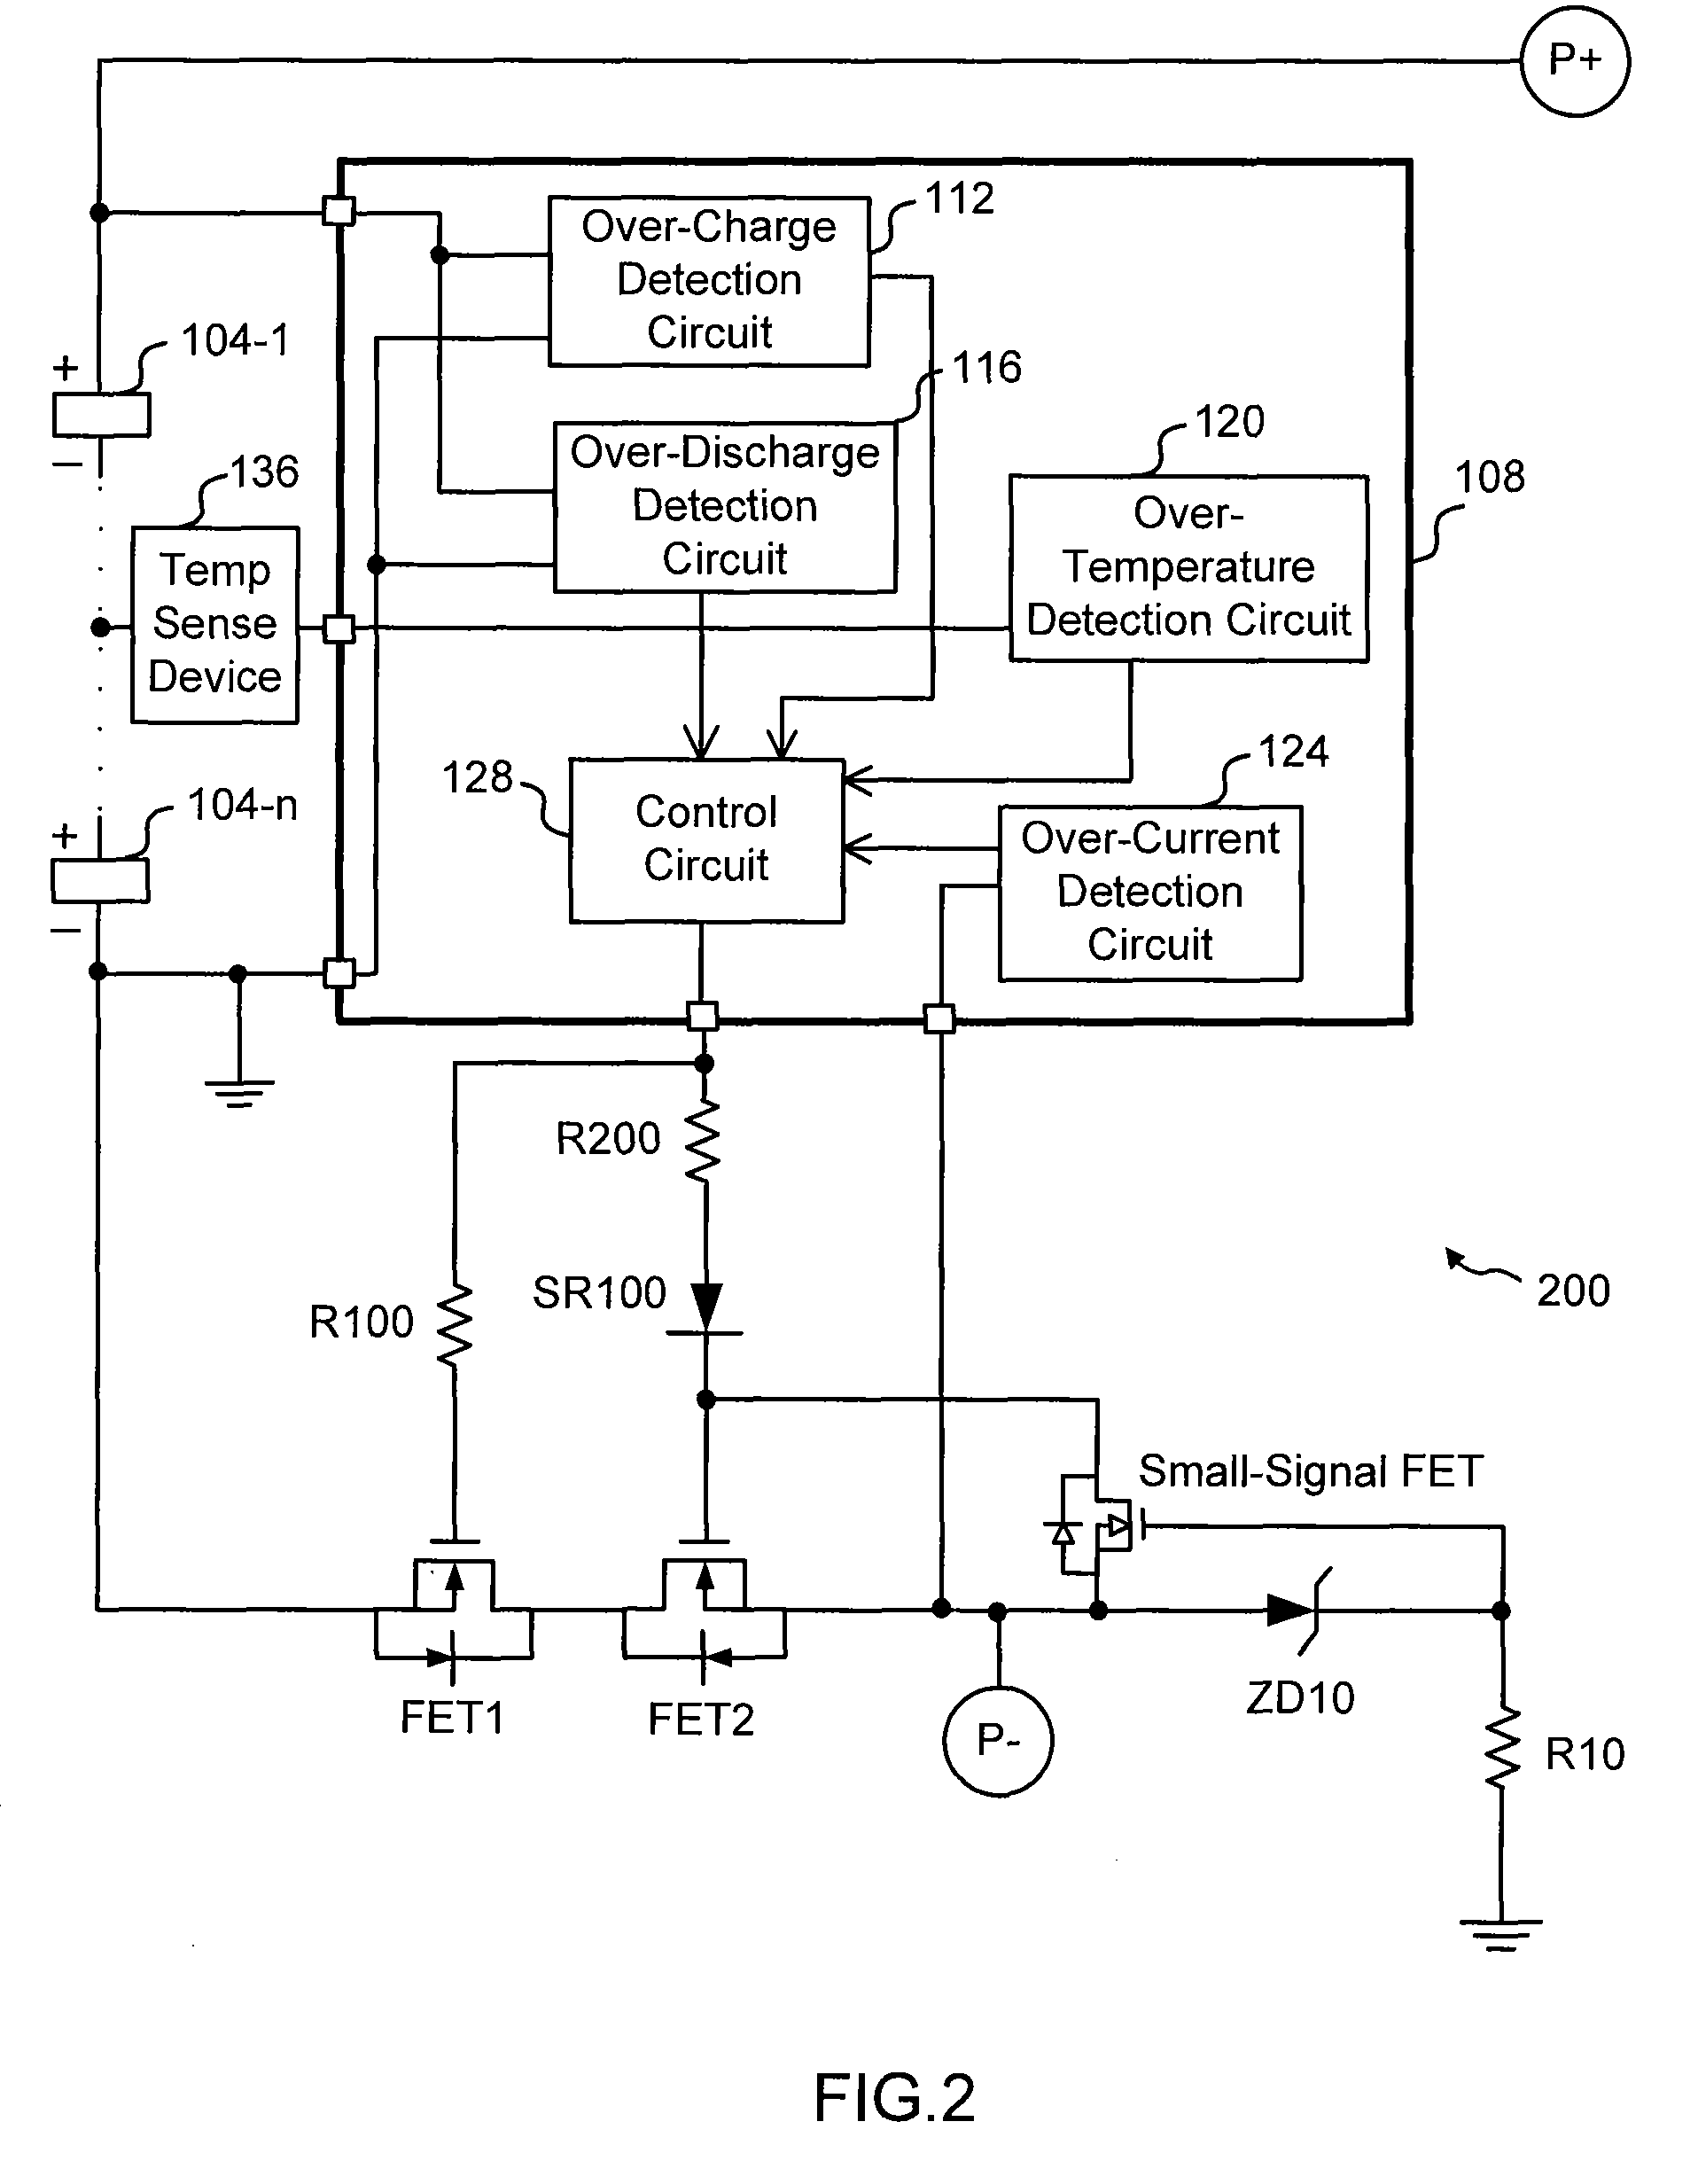 Low side N-channel FET protection circuit